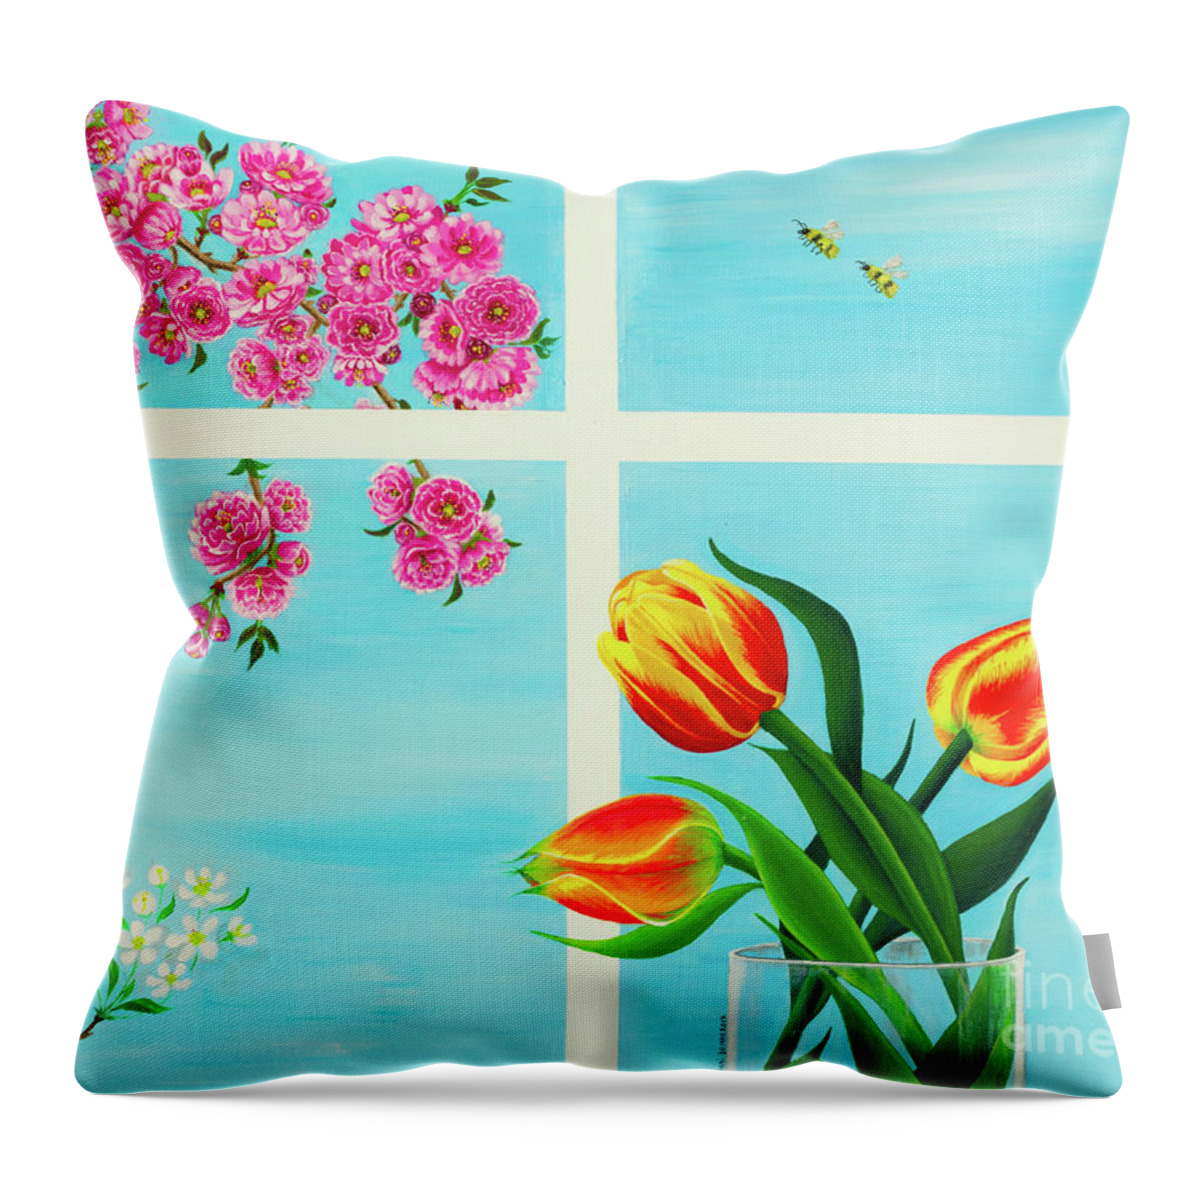 Painting Throw Pillow featuring the painting Friendship, Freshness, Fragnance by Sudakshina Bhattacharya